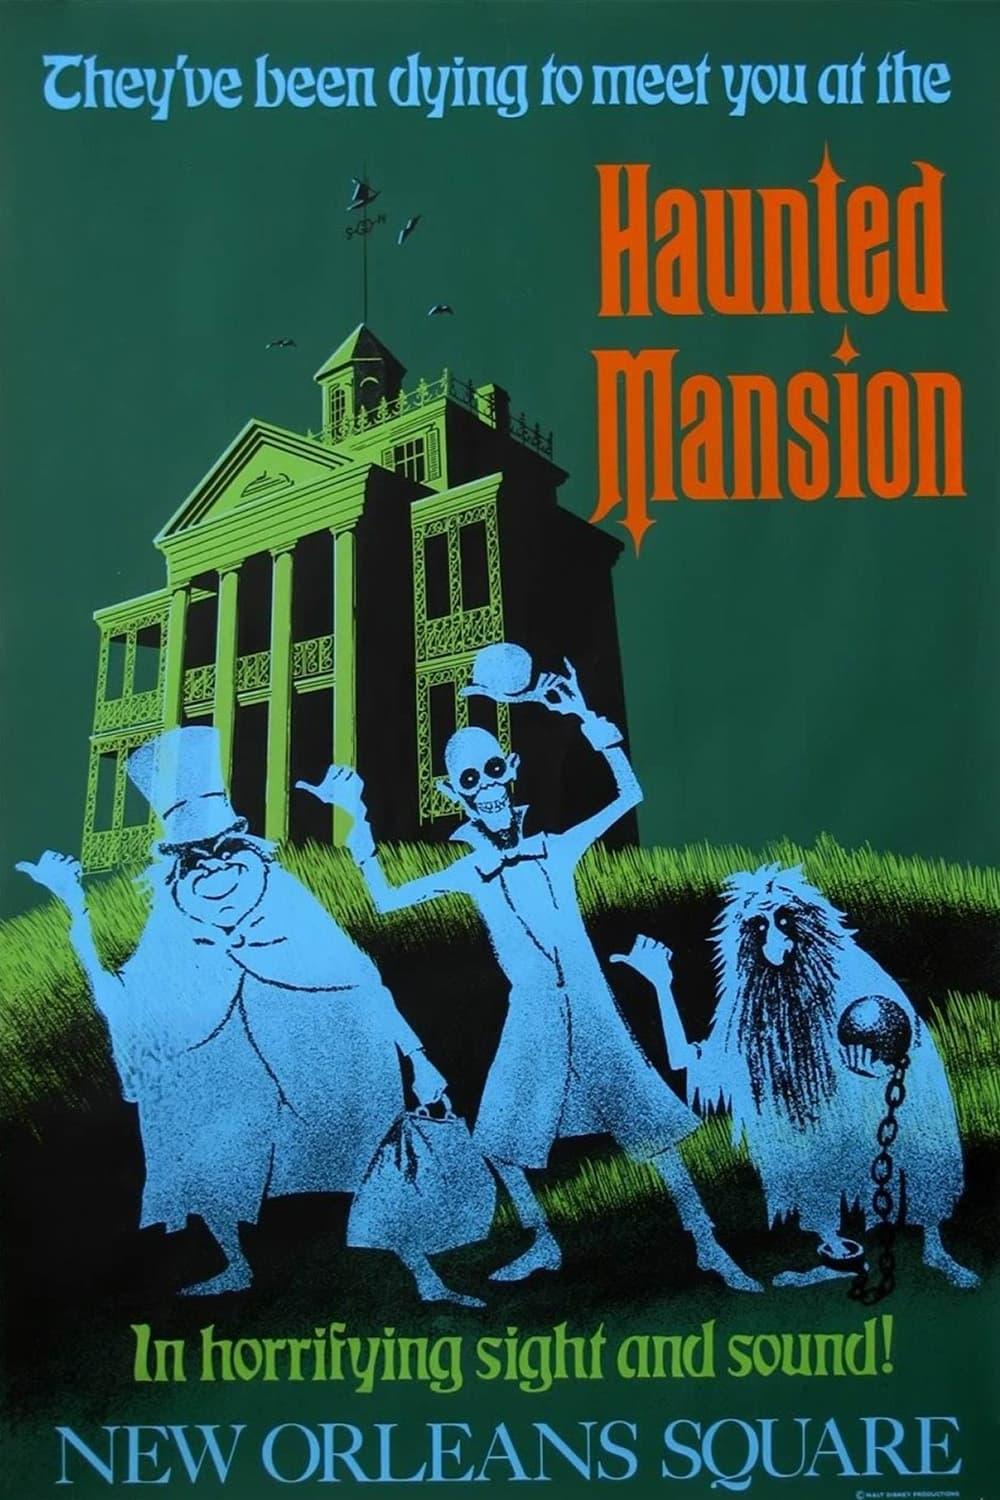 Extinct Attractions Club Presents: The Haunted Mansion Story poster